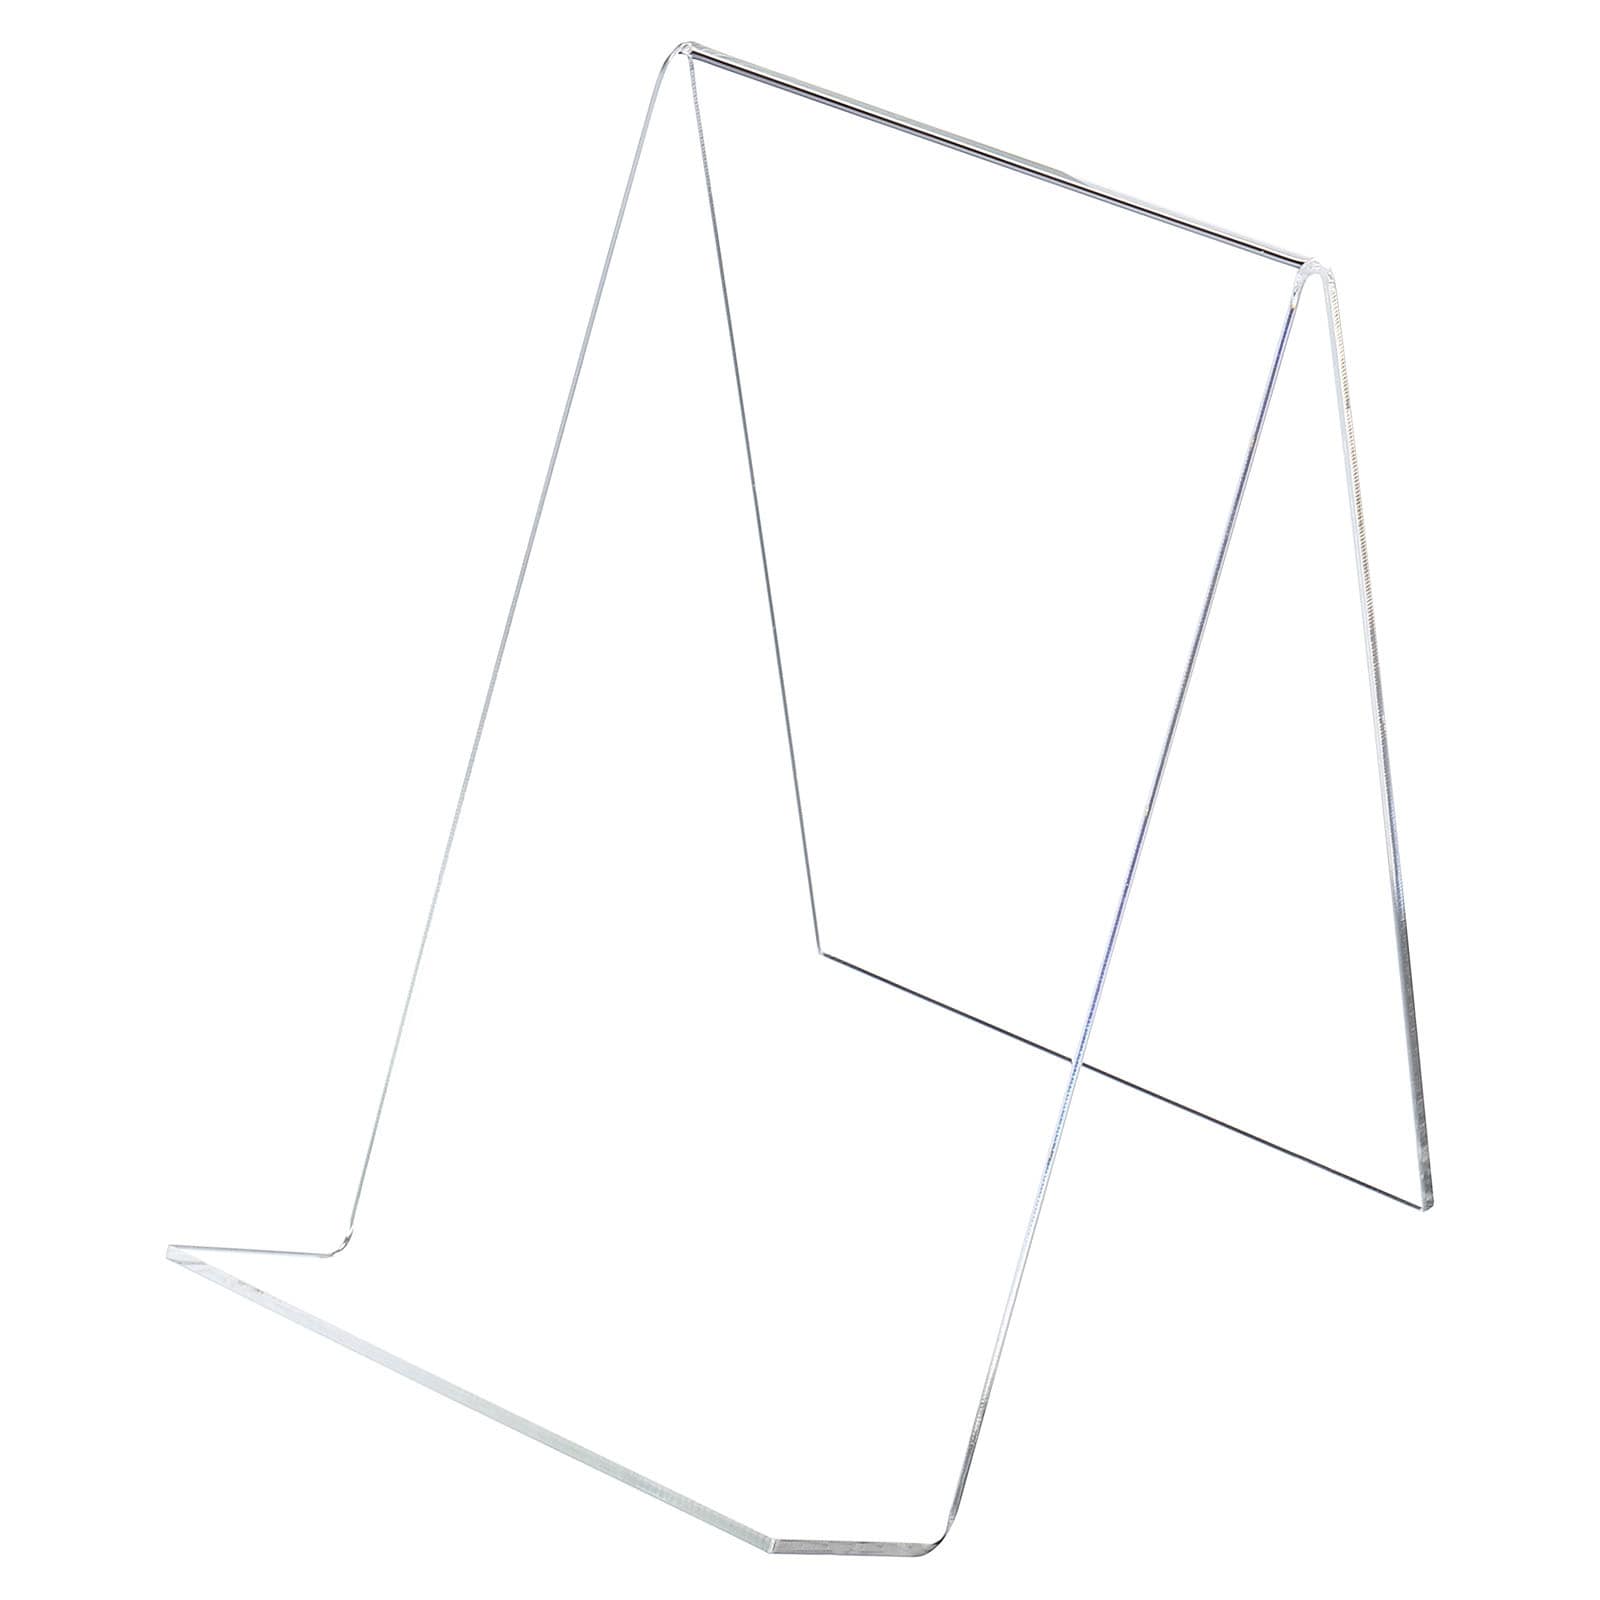 Acrylic Book Stands for Display, 6pcs Acrylic Display Easel for Pictures  Books - Transparent